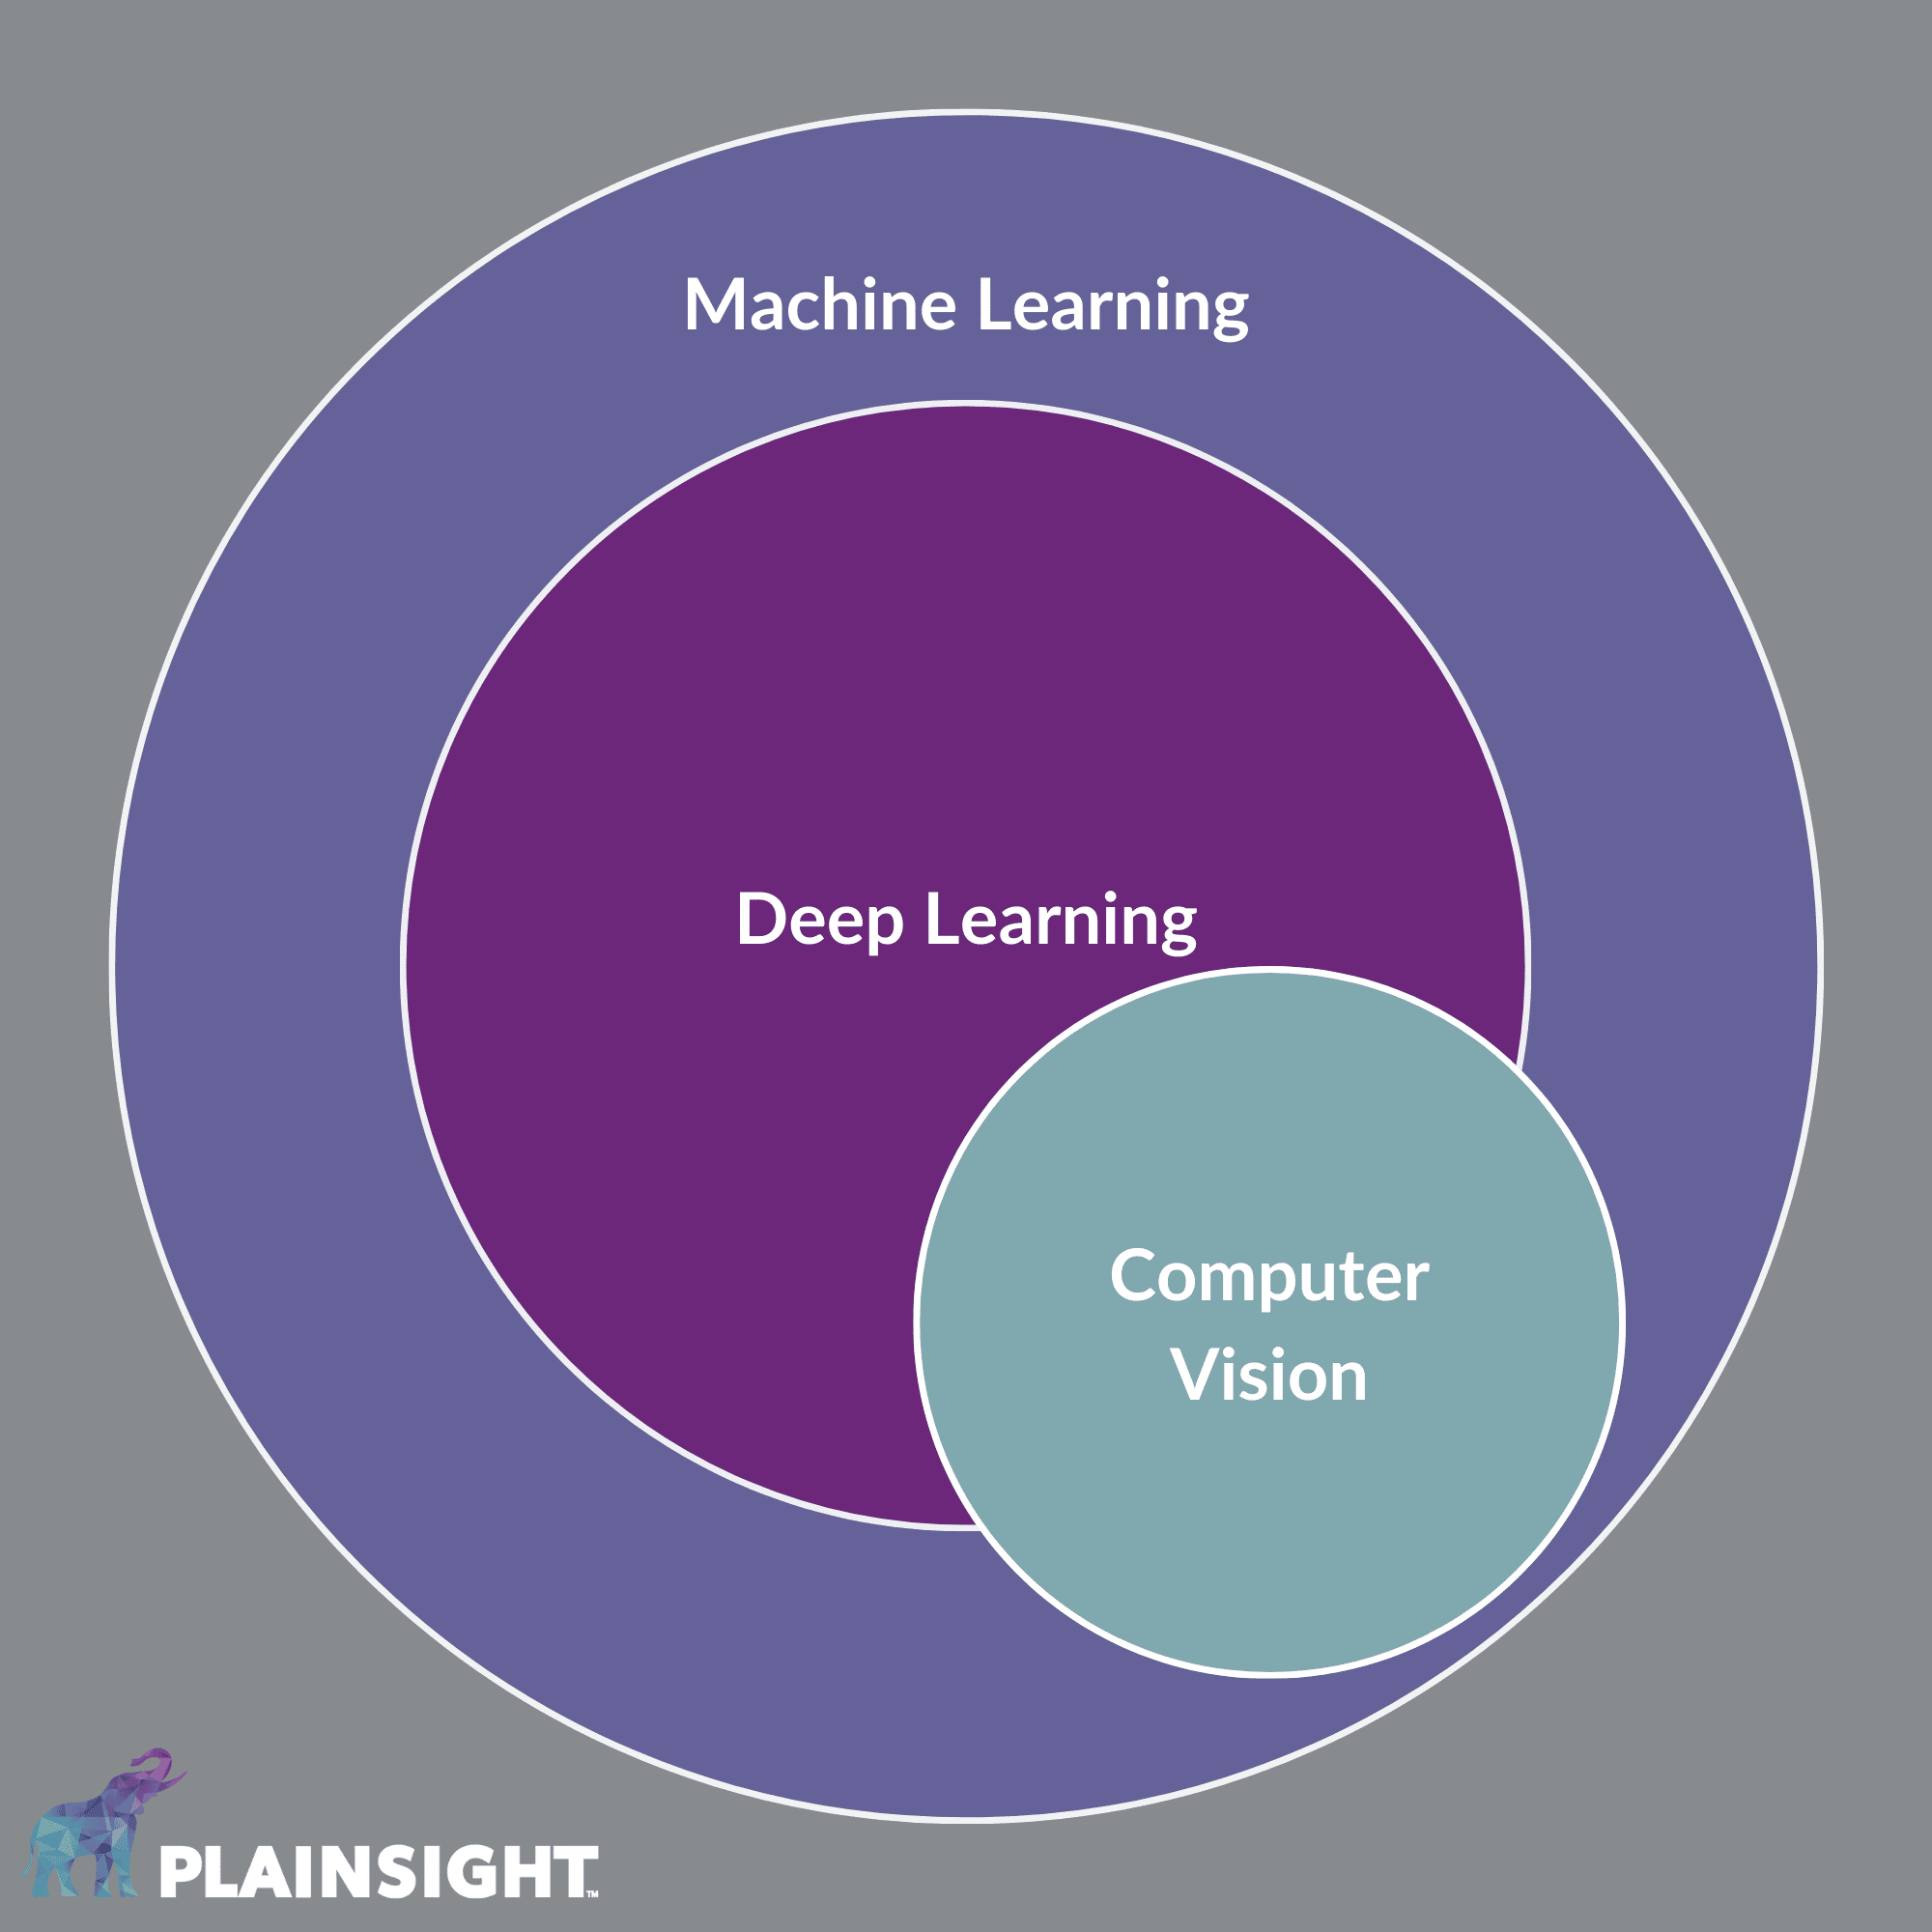 A diagram showing the relationship between machine learning, deep learning, and computer vision